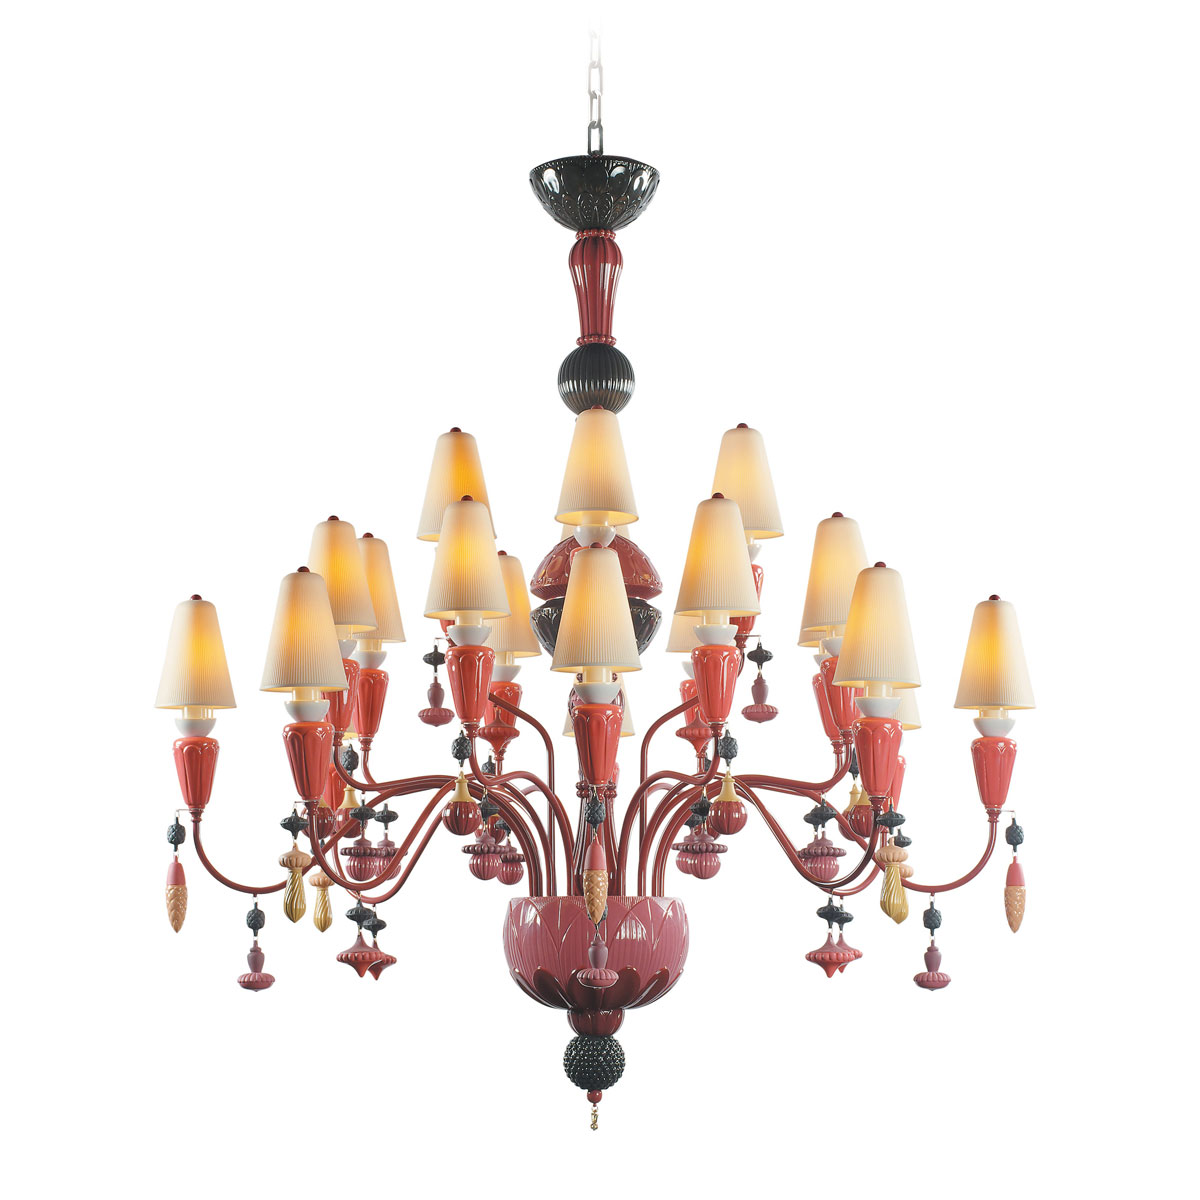 Lladro Classic Lighting, Ivy And Seed 20 Lights Chandelier. Medium Model. Red Coral